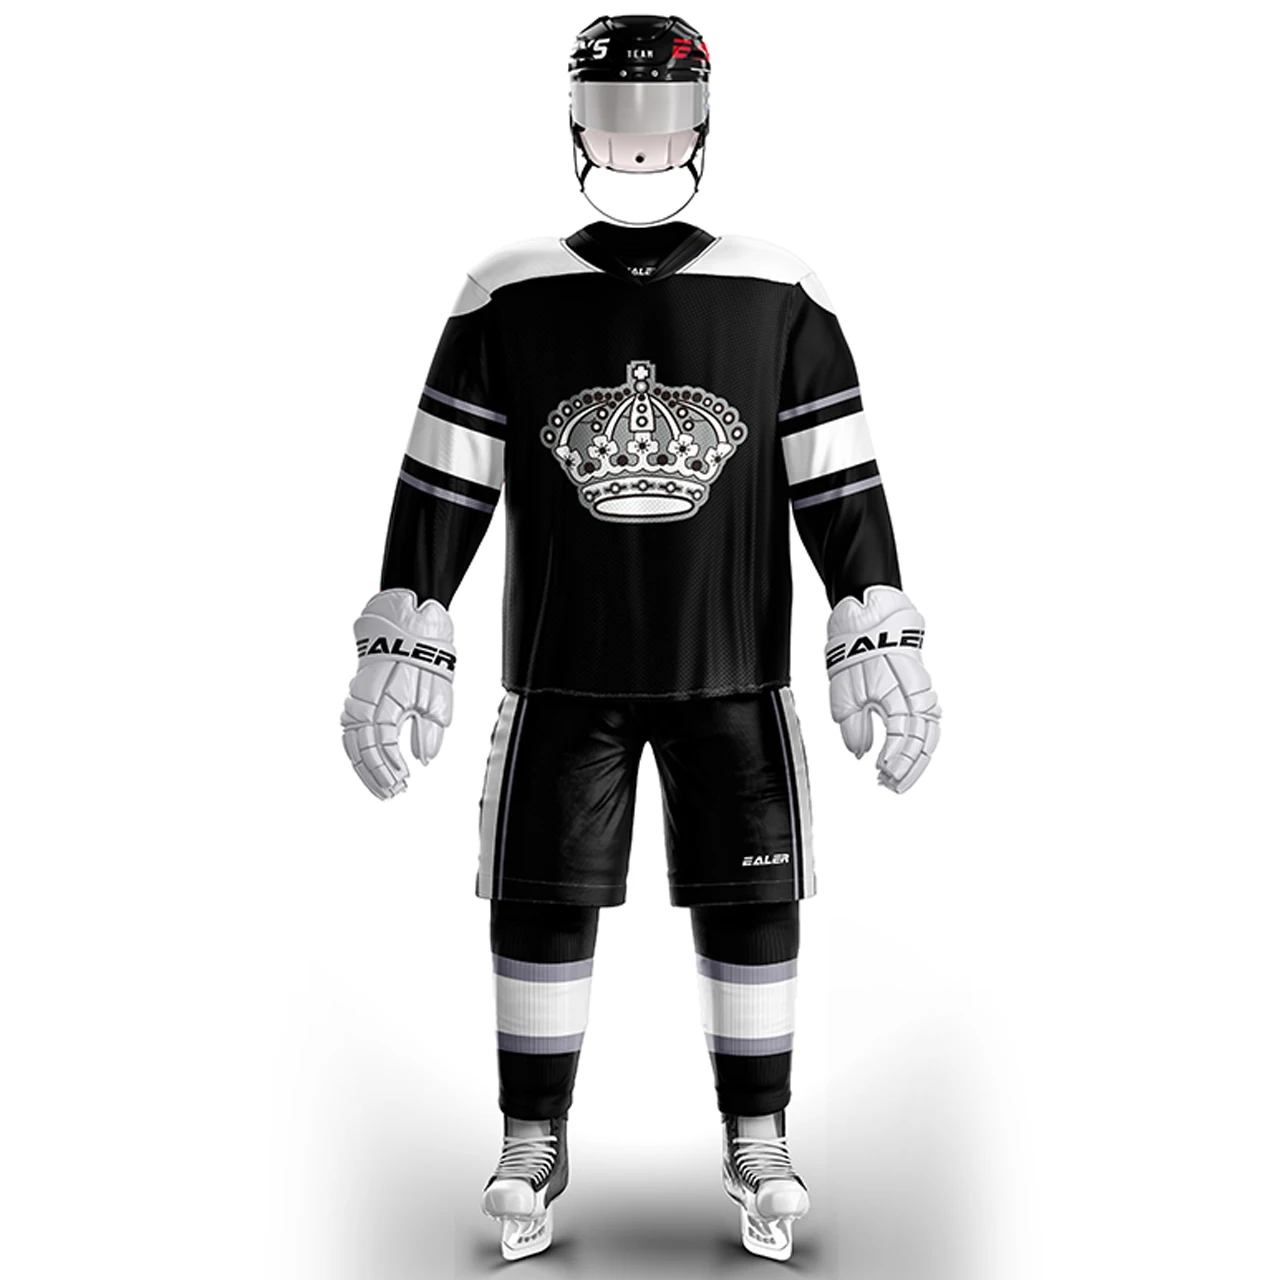 Coldoutdoor free shipping Los Angeles Training suit With Printing kings Logo ice hockey jerseys in stock customized E062